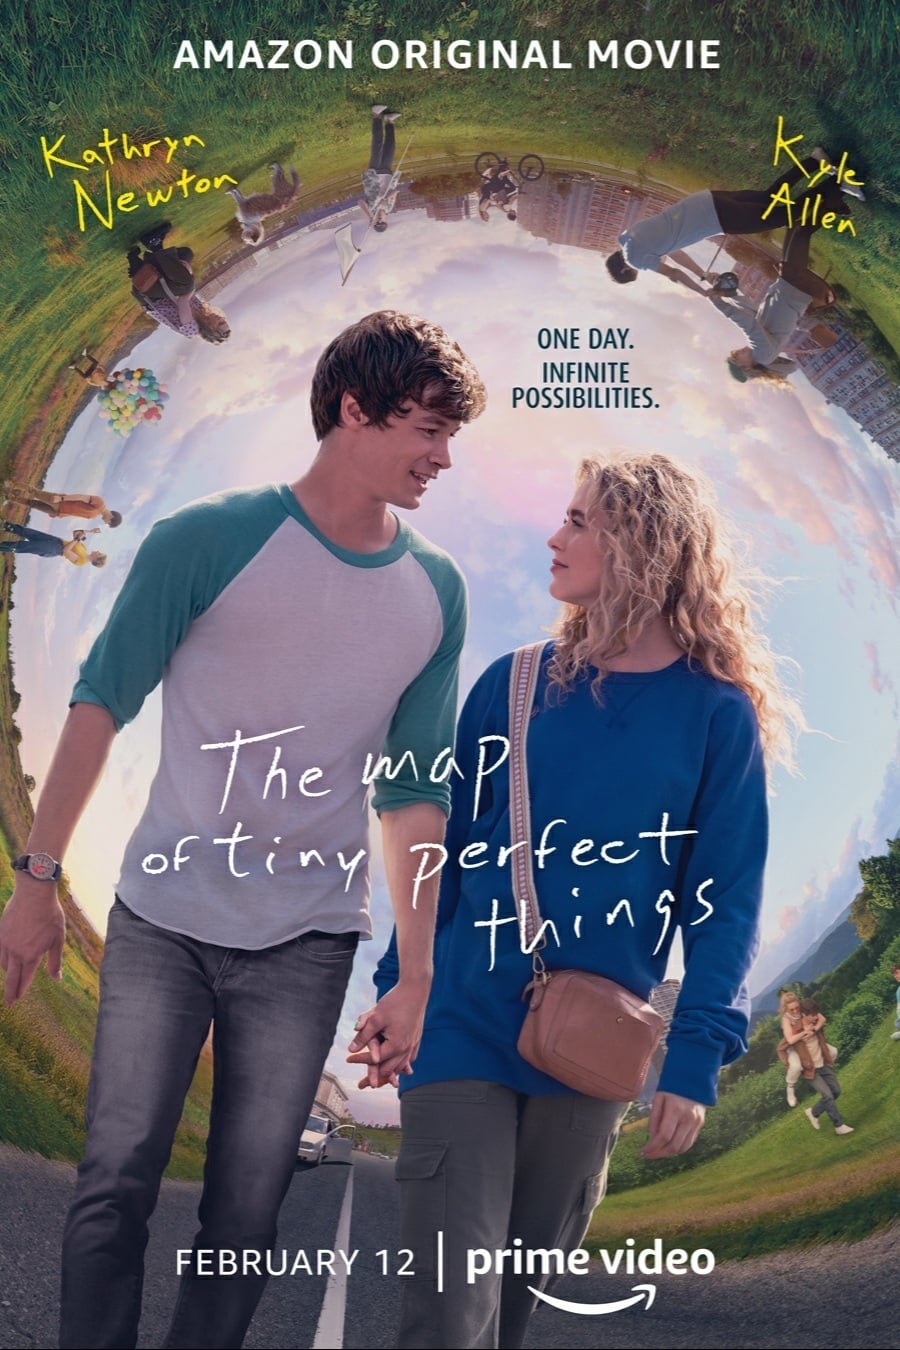 The story of two teenagers trapped in an endless time loop who set out to find all the tiny things that make that one day perfect.